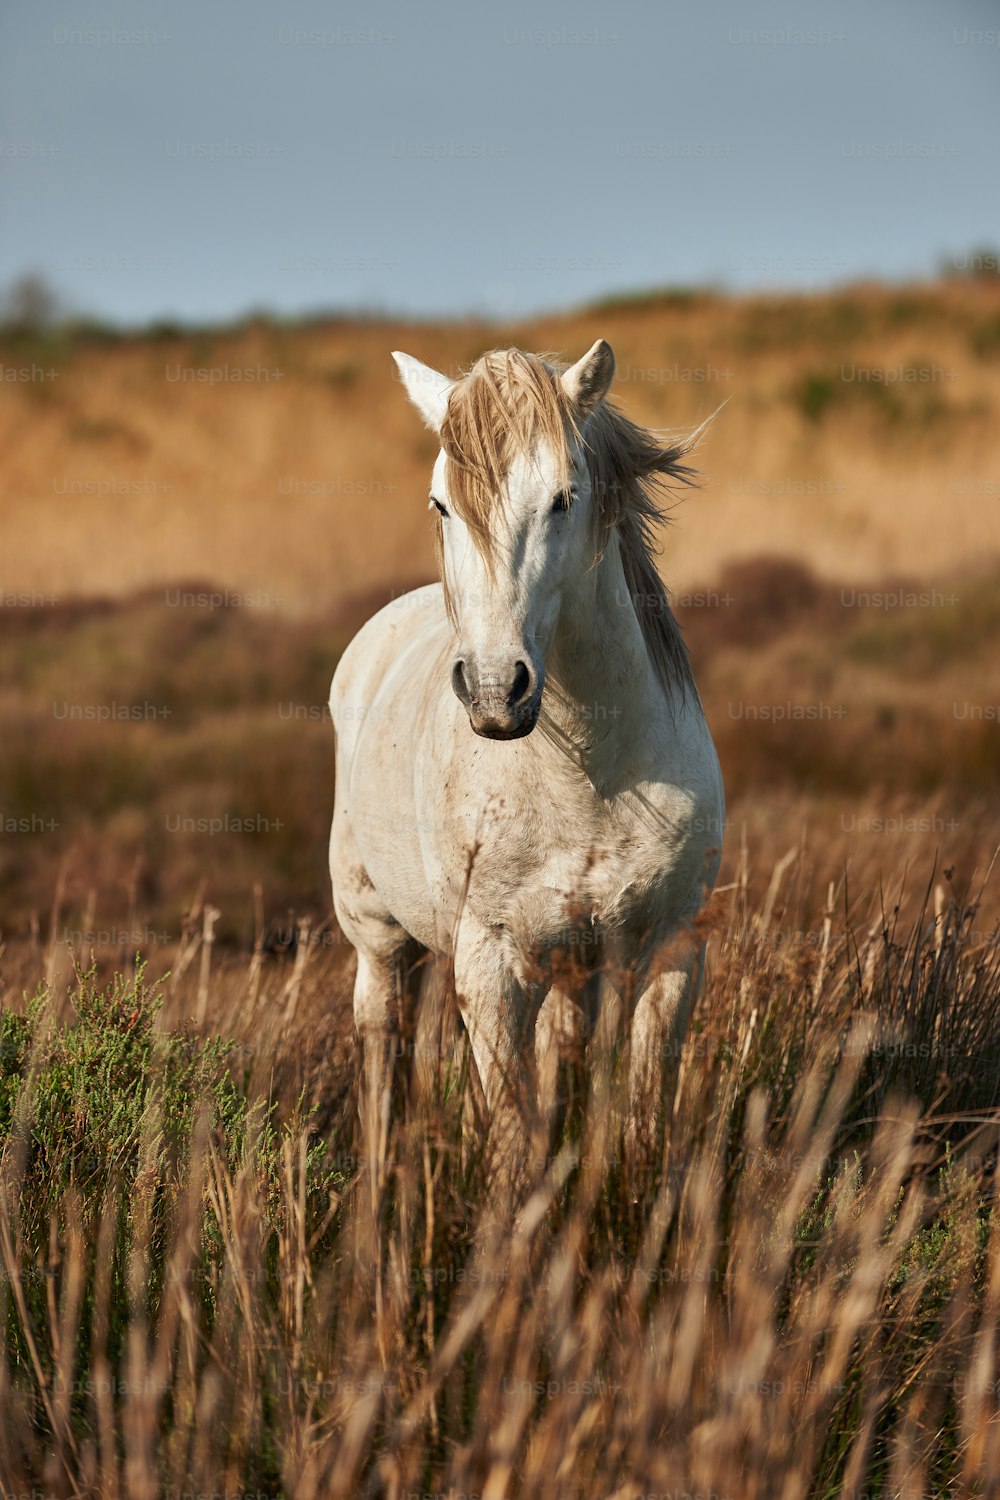 A white stallion of Camargue photographed frontally and vertically